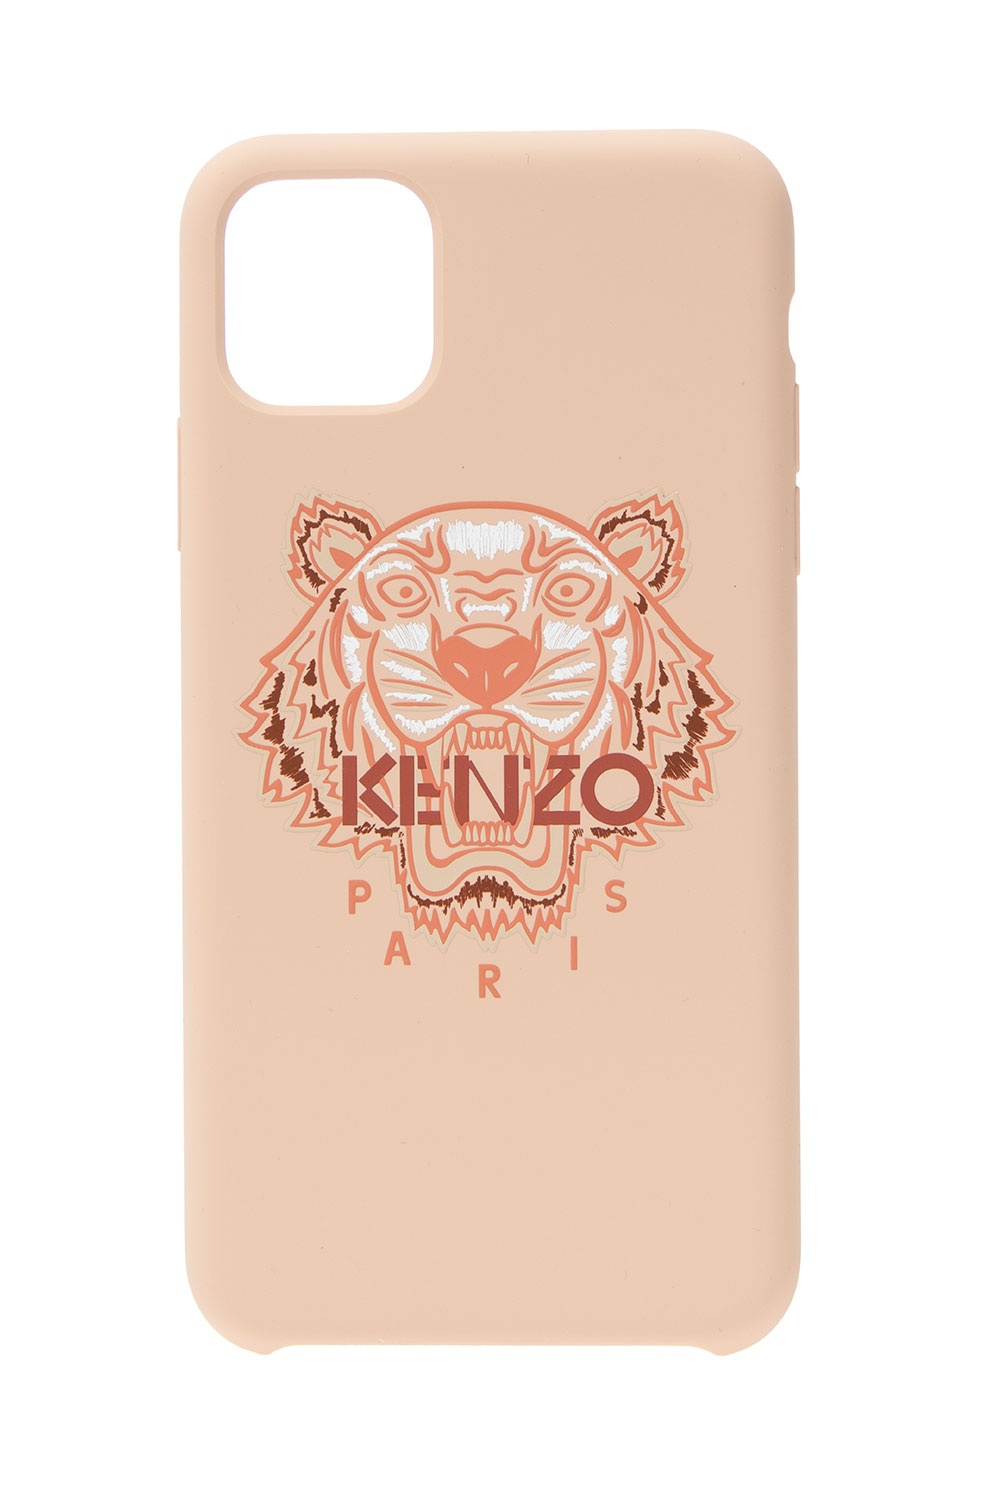 kenzo iphone case pink